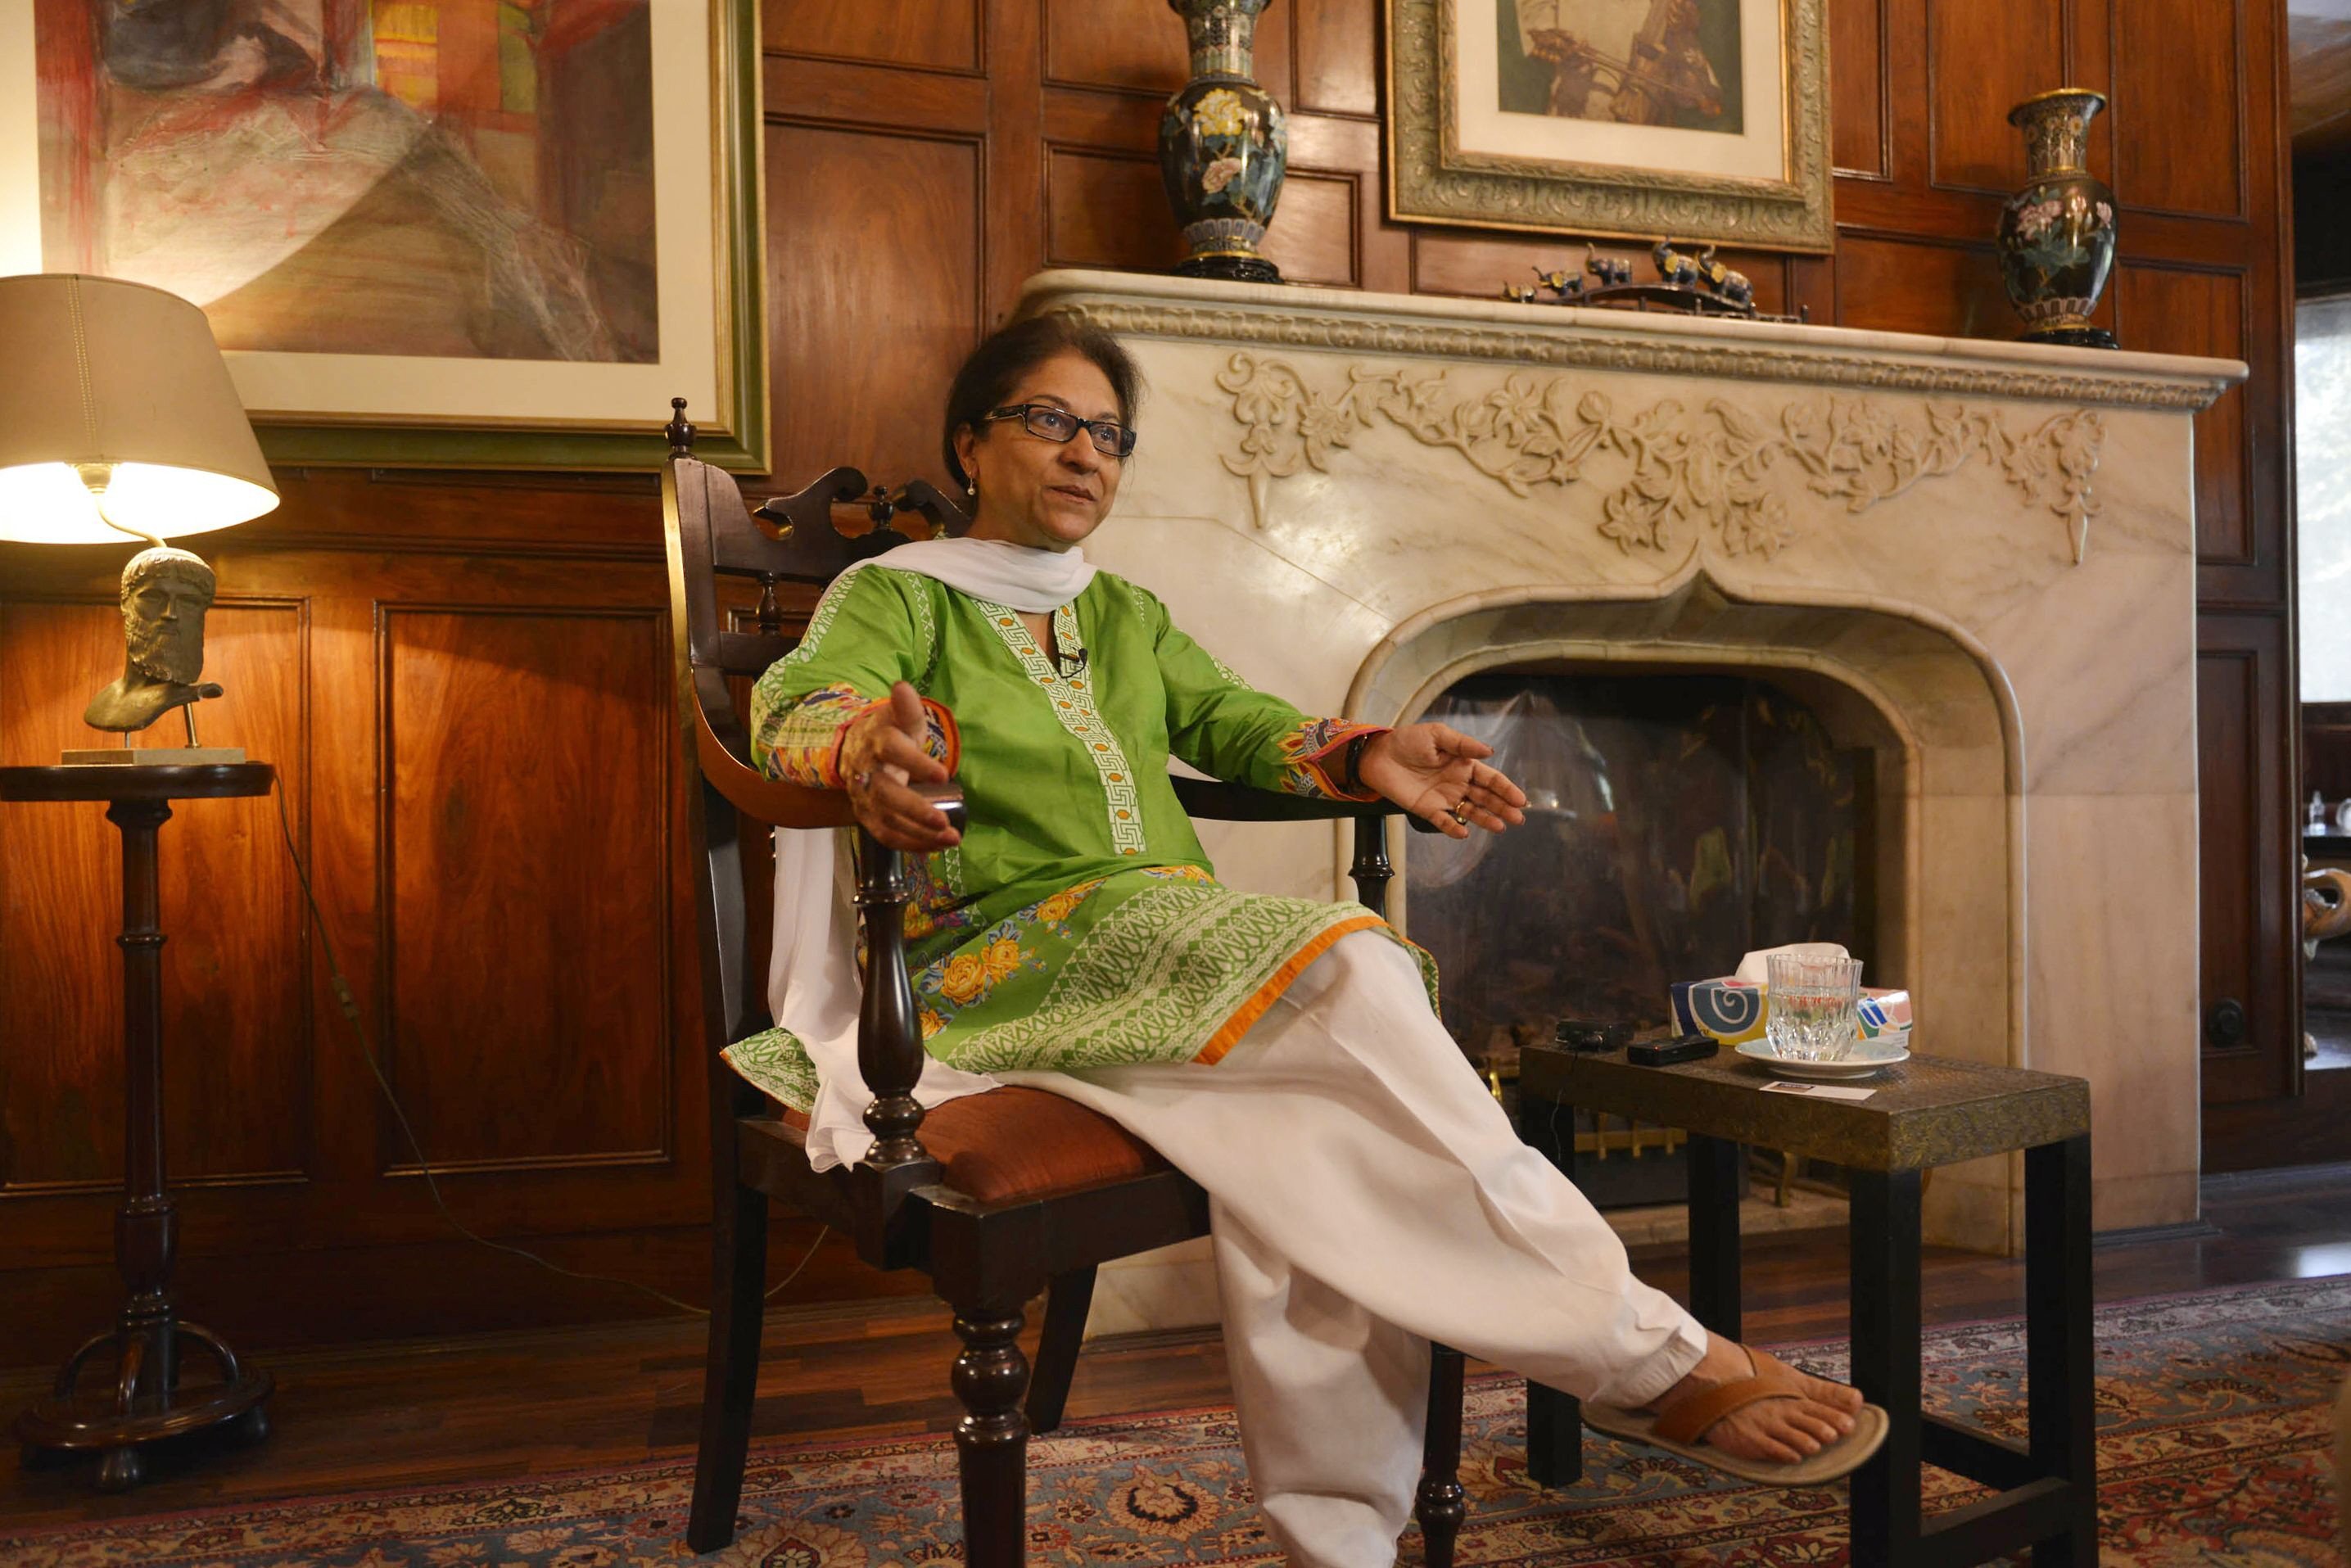 asma jahangir was voice of sanity and compassion